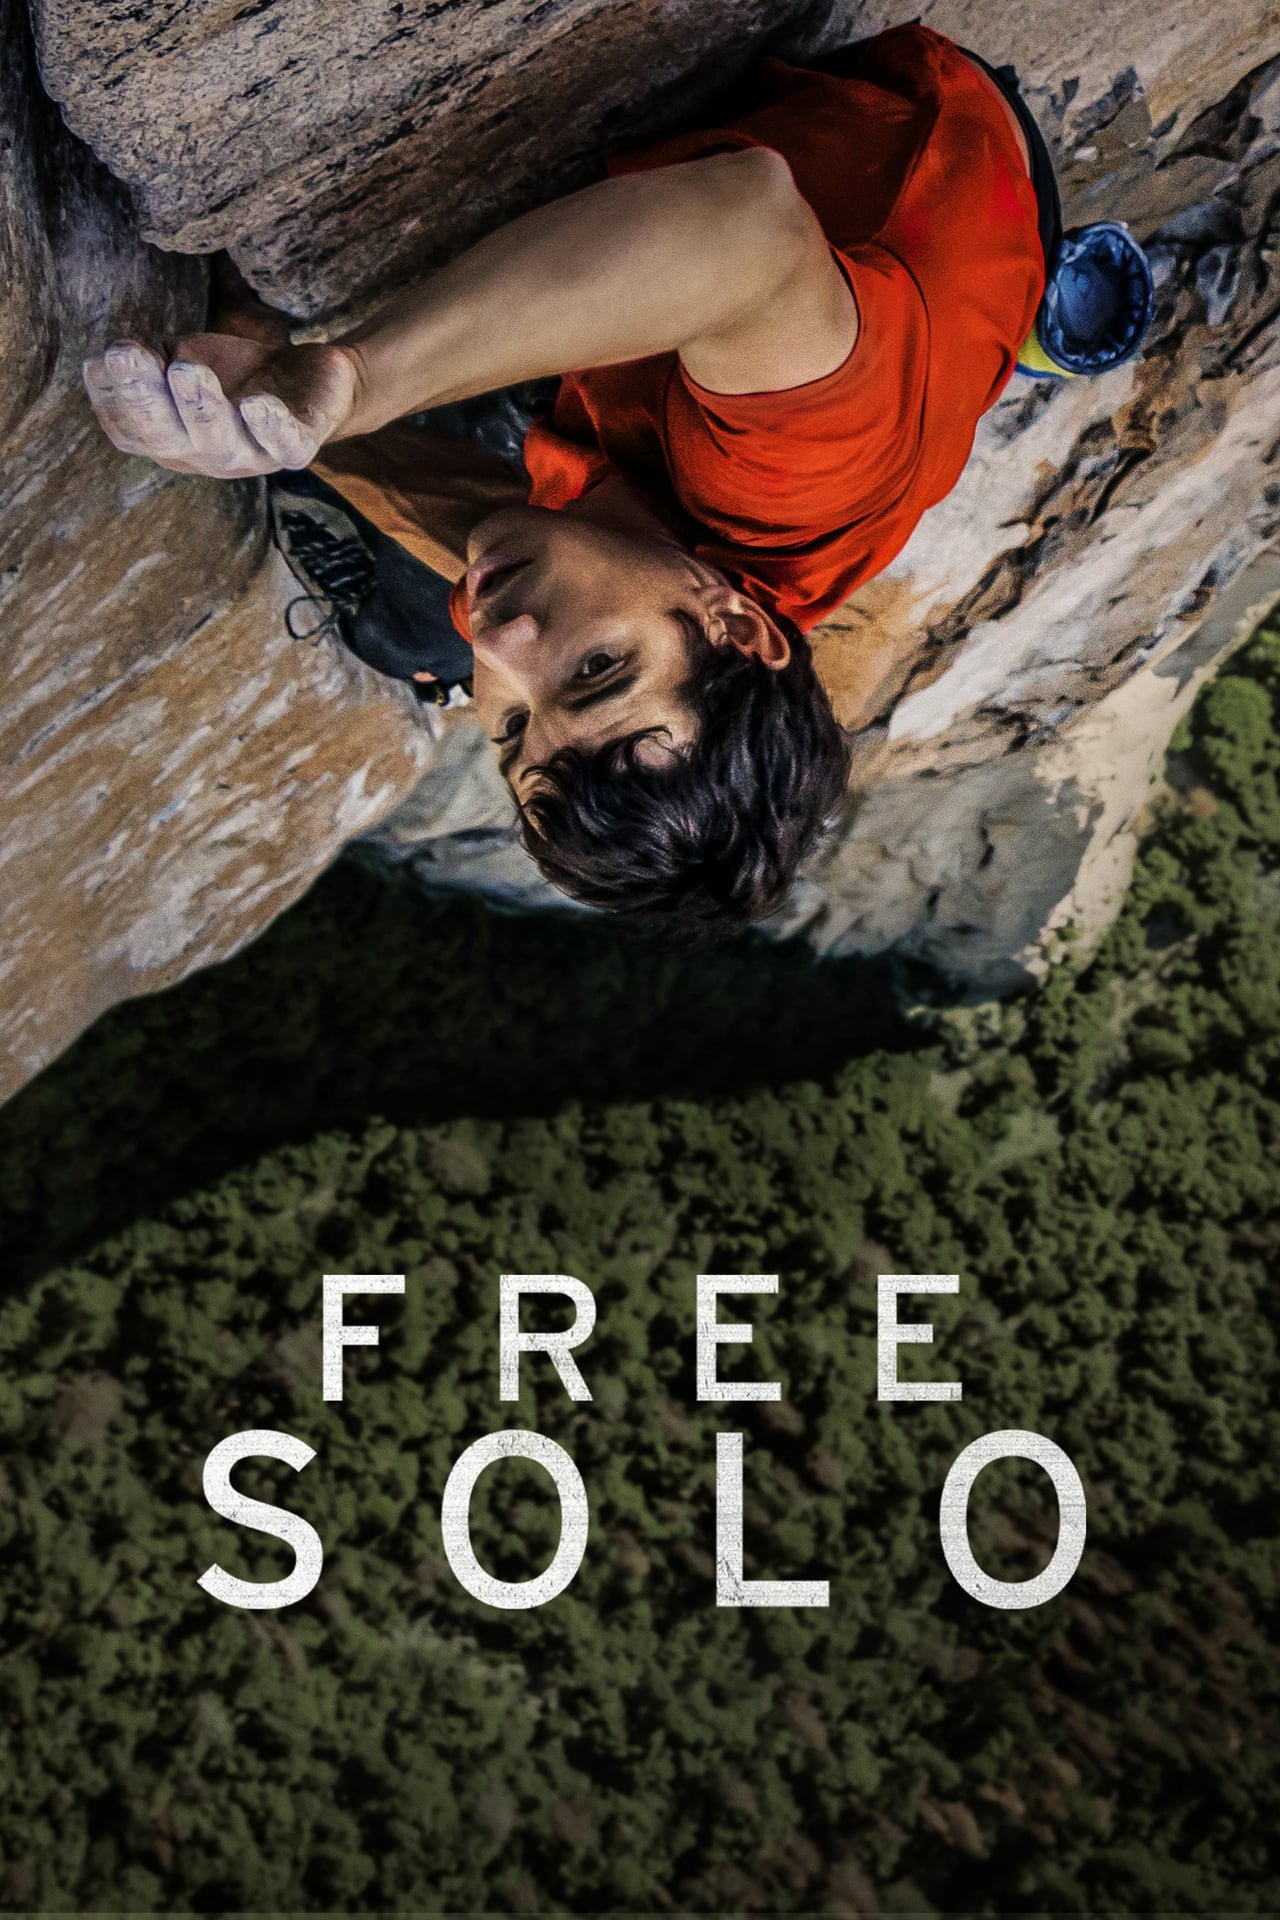 Poster Free Solo